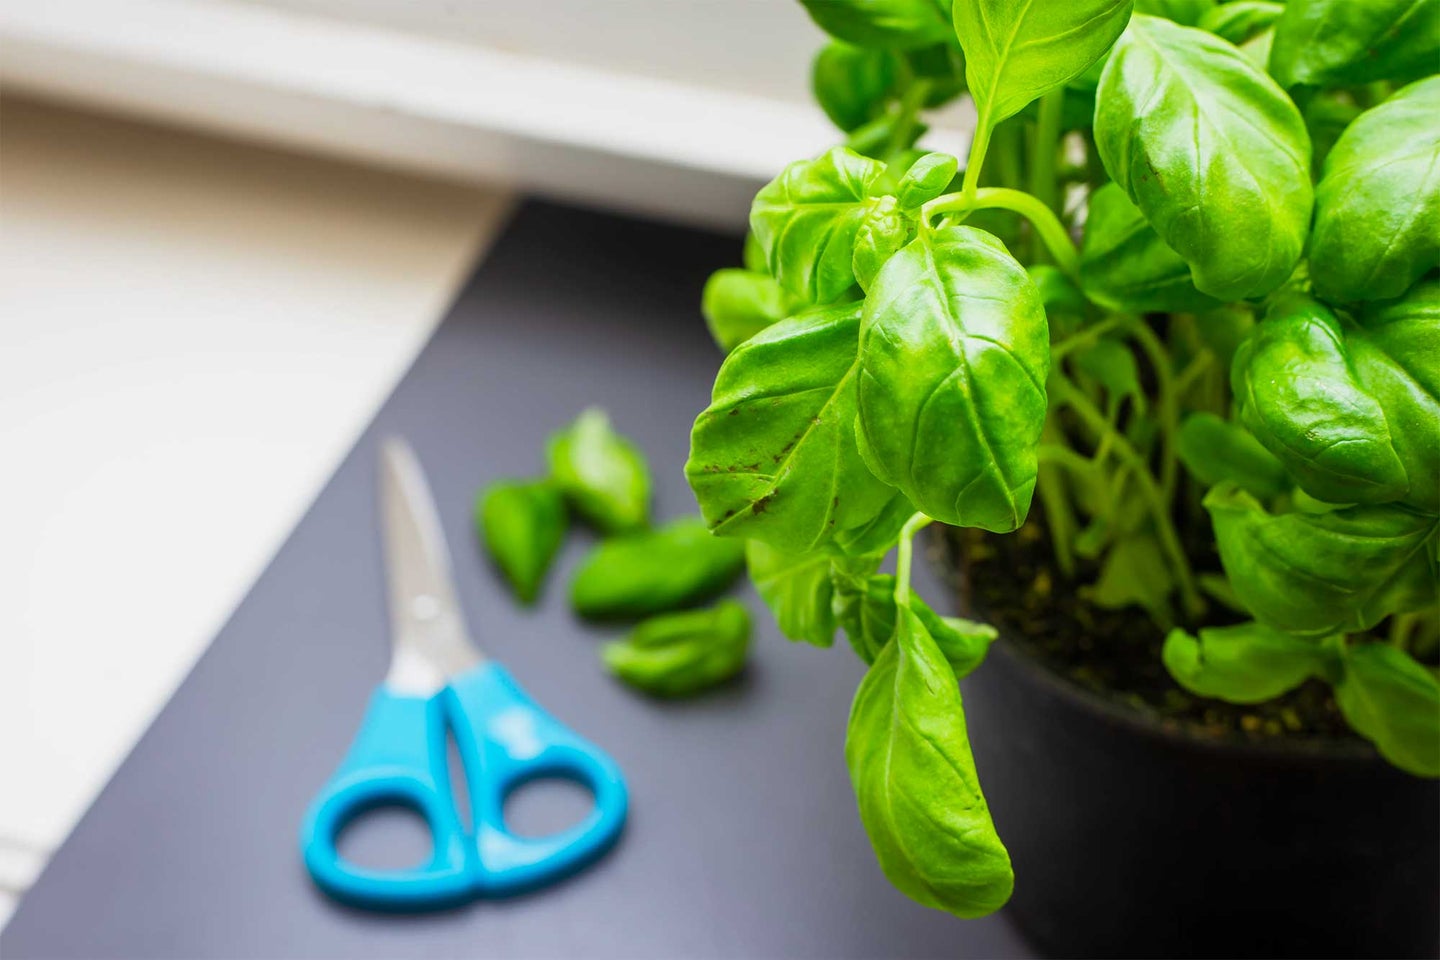 Basil plant with kitchen shears in the background